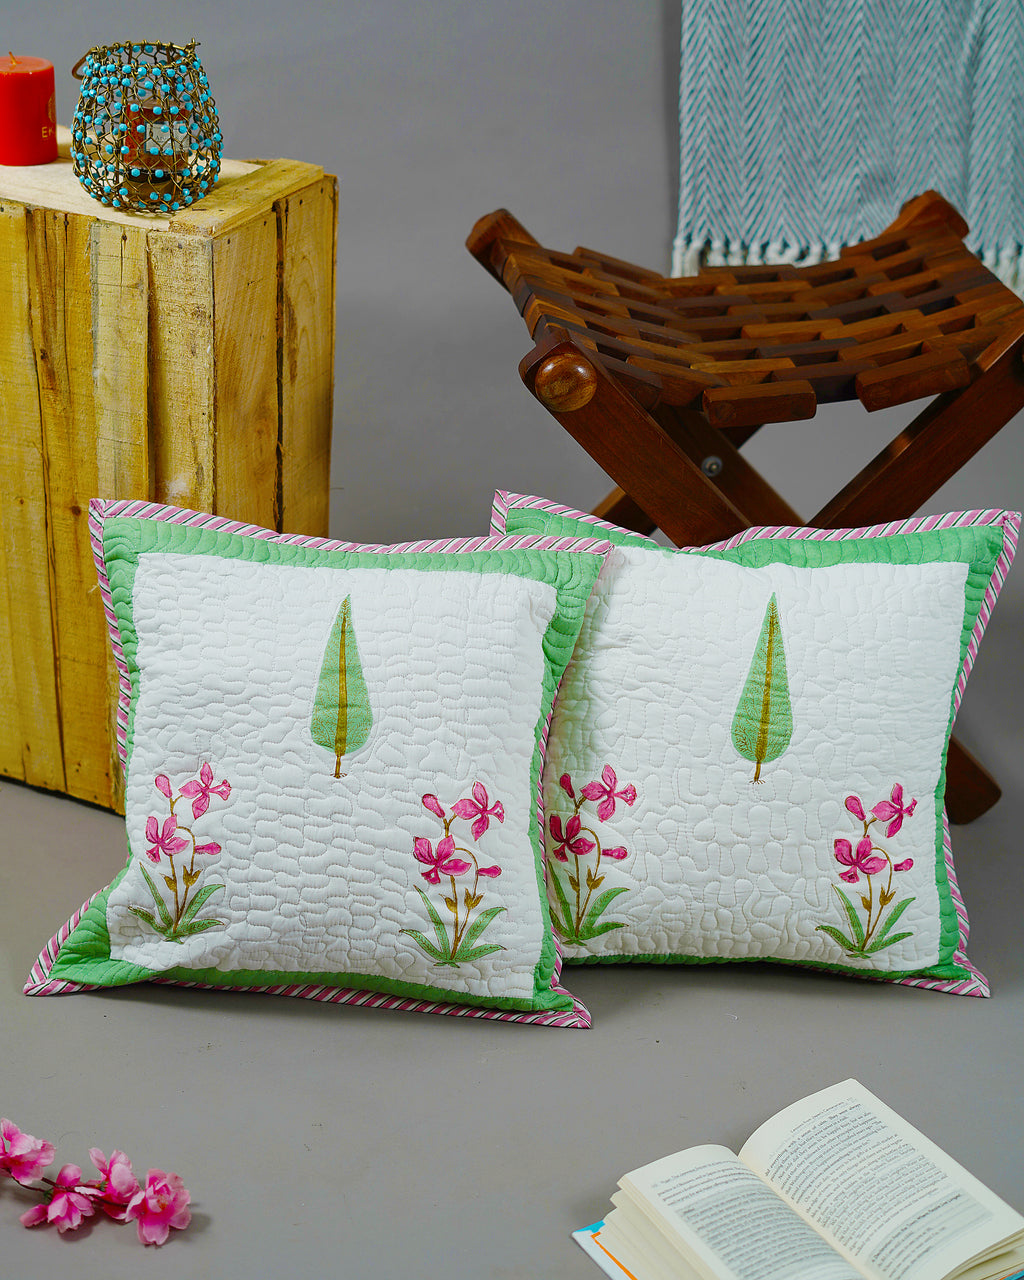 A PAIR OF HAND BLOCK PRINTED CUSHION COVER SIZE 16 by 16 INCHES